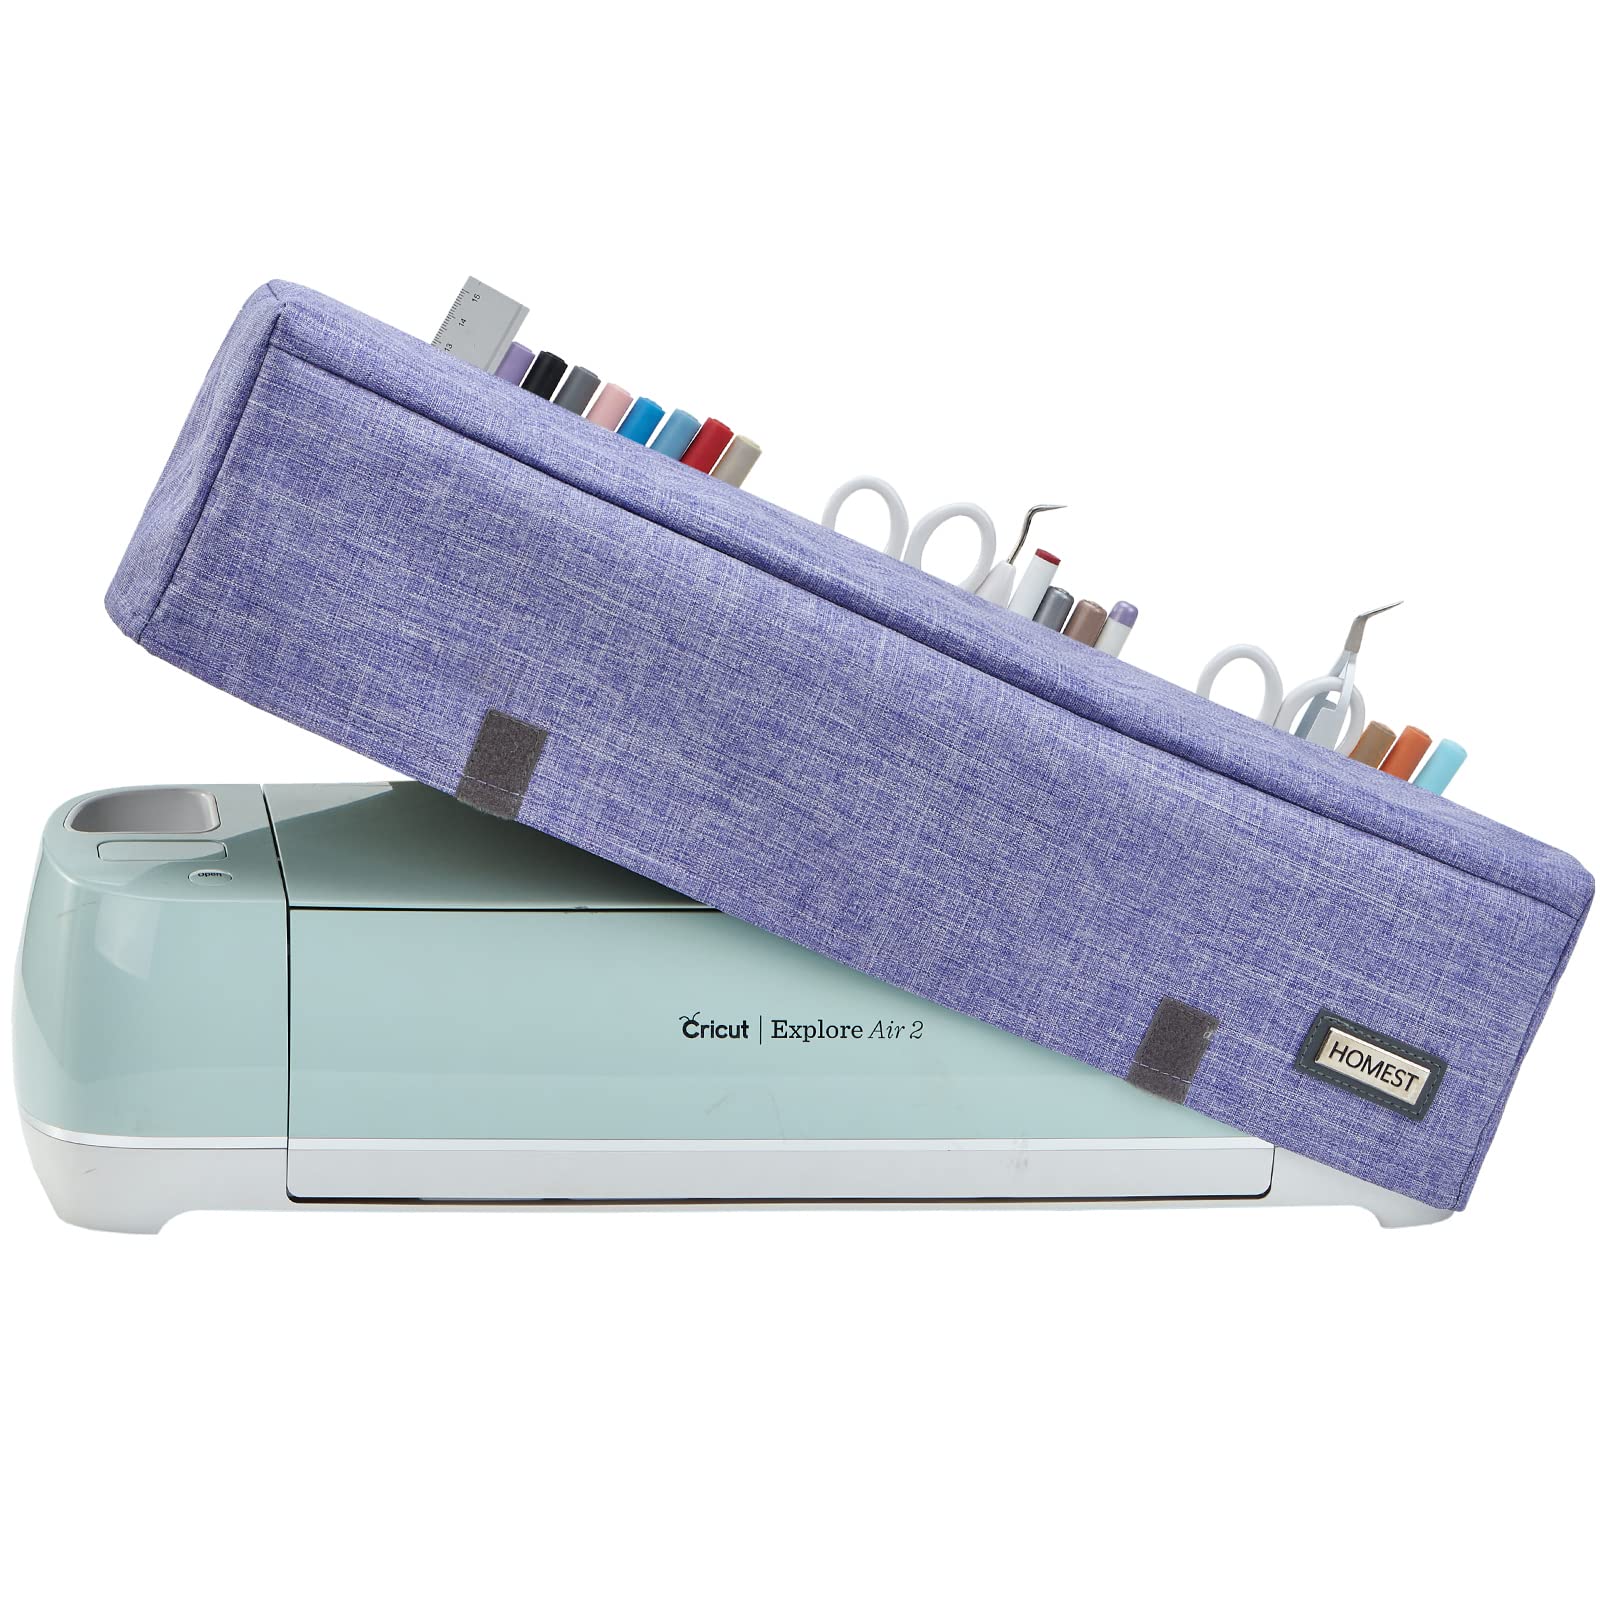 HOMEST Dust Cover with Back Pockets Compatible with Cricut Explore Air 2  and Cricut Explore Air, Dark Purple (Patent Design) Purple A-Dust Cover